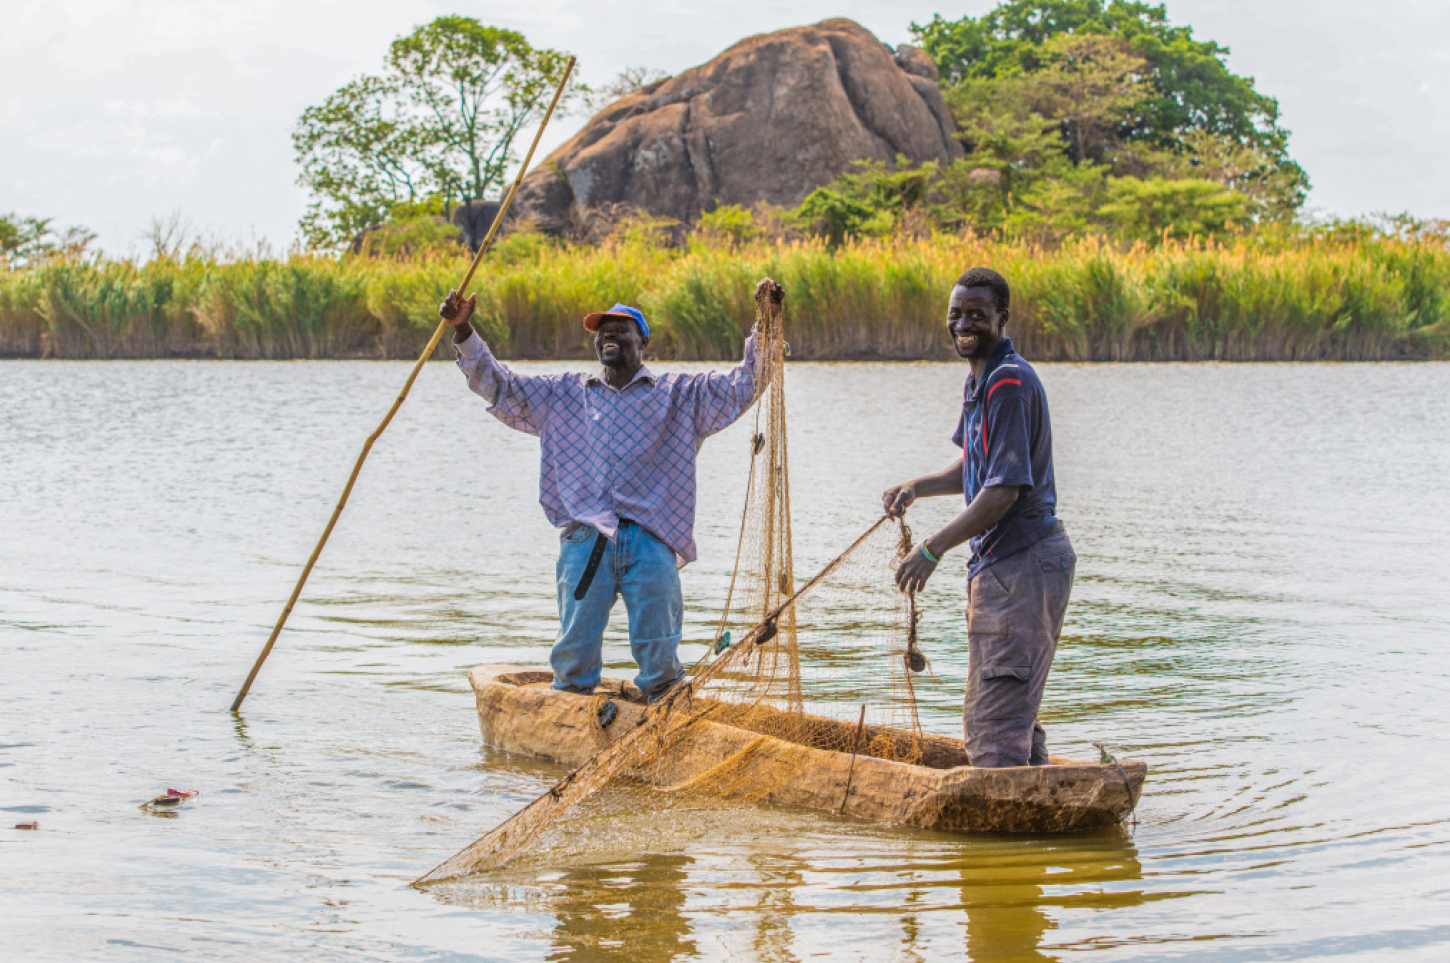 Two small-scale artisanal fishermen proudly standing on their boat in a dam-lake and lifting up their fishing net.